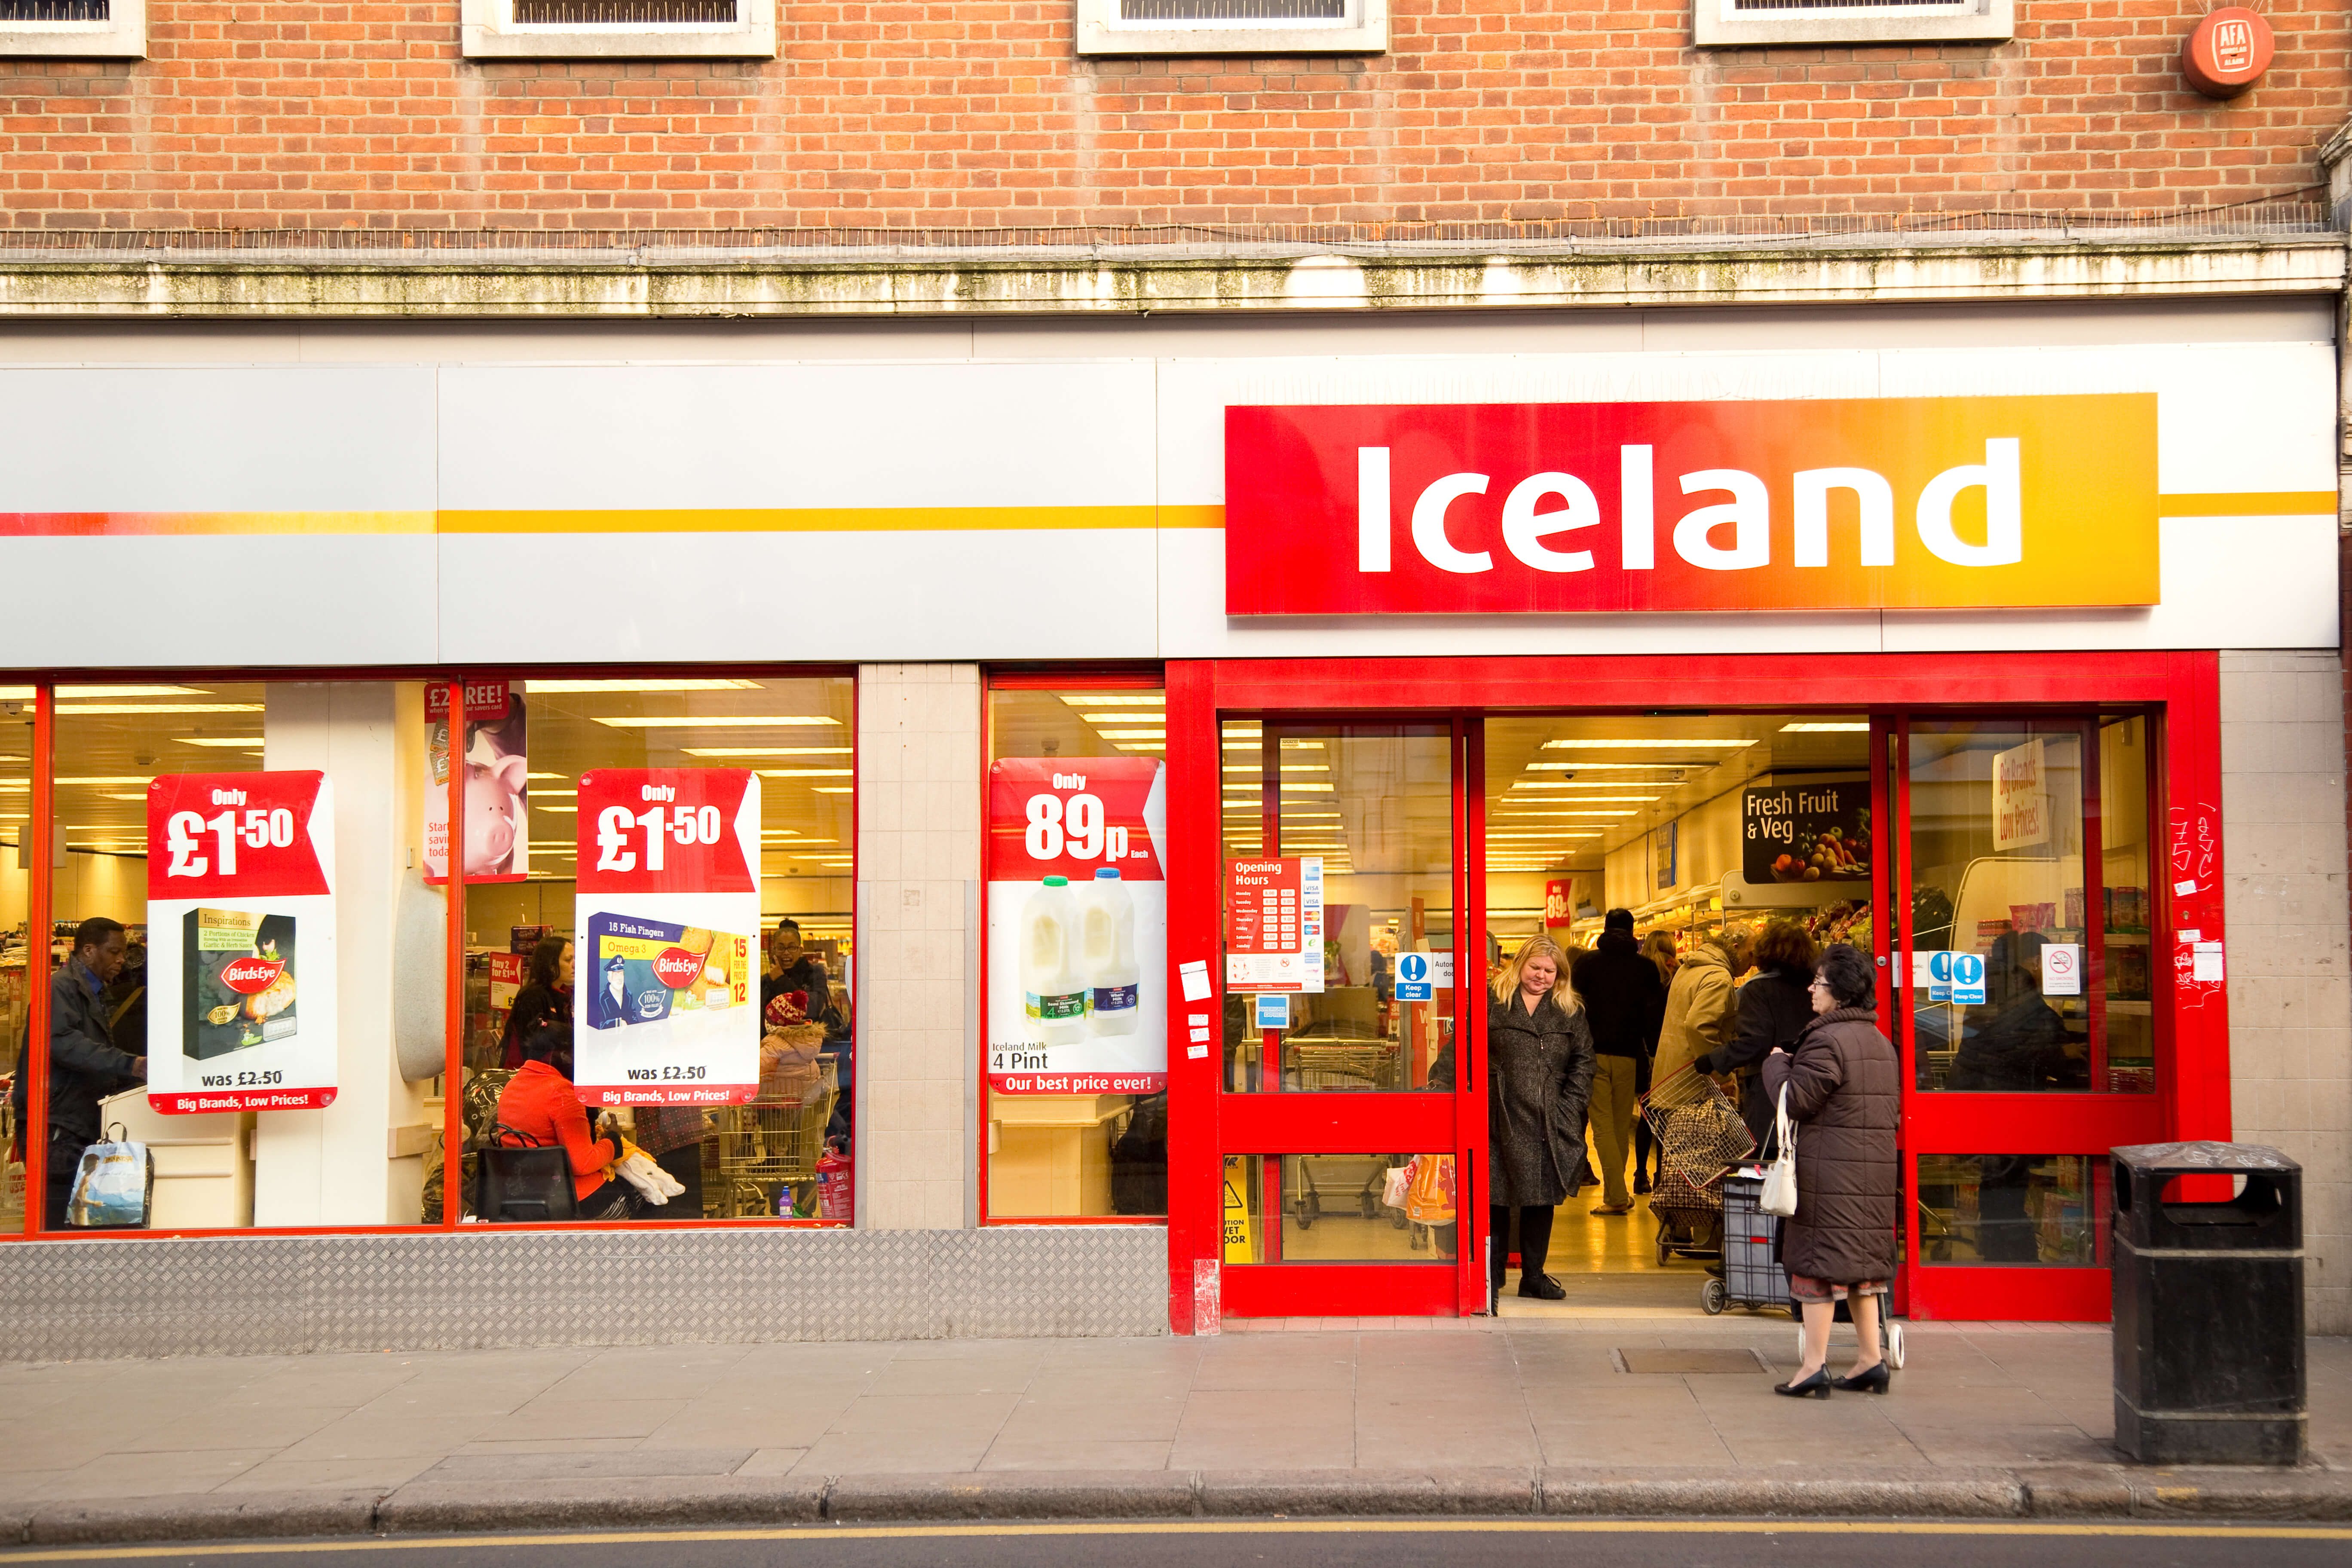 Iceland's analysis of CX led to improvements in delivery driver training.